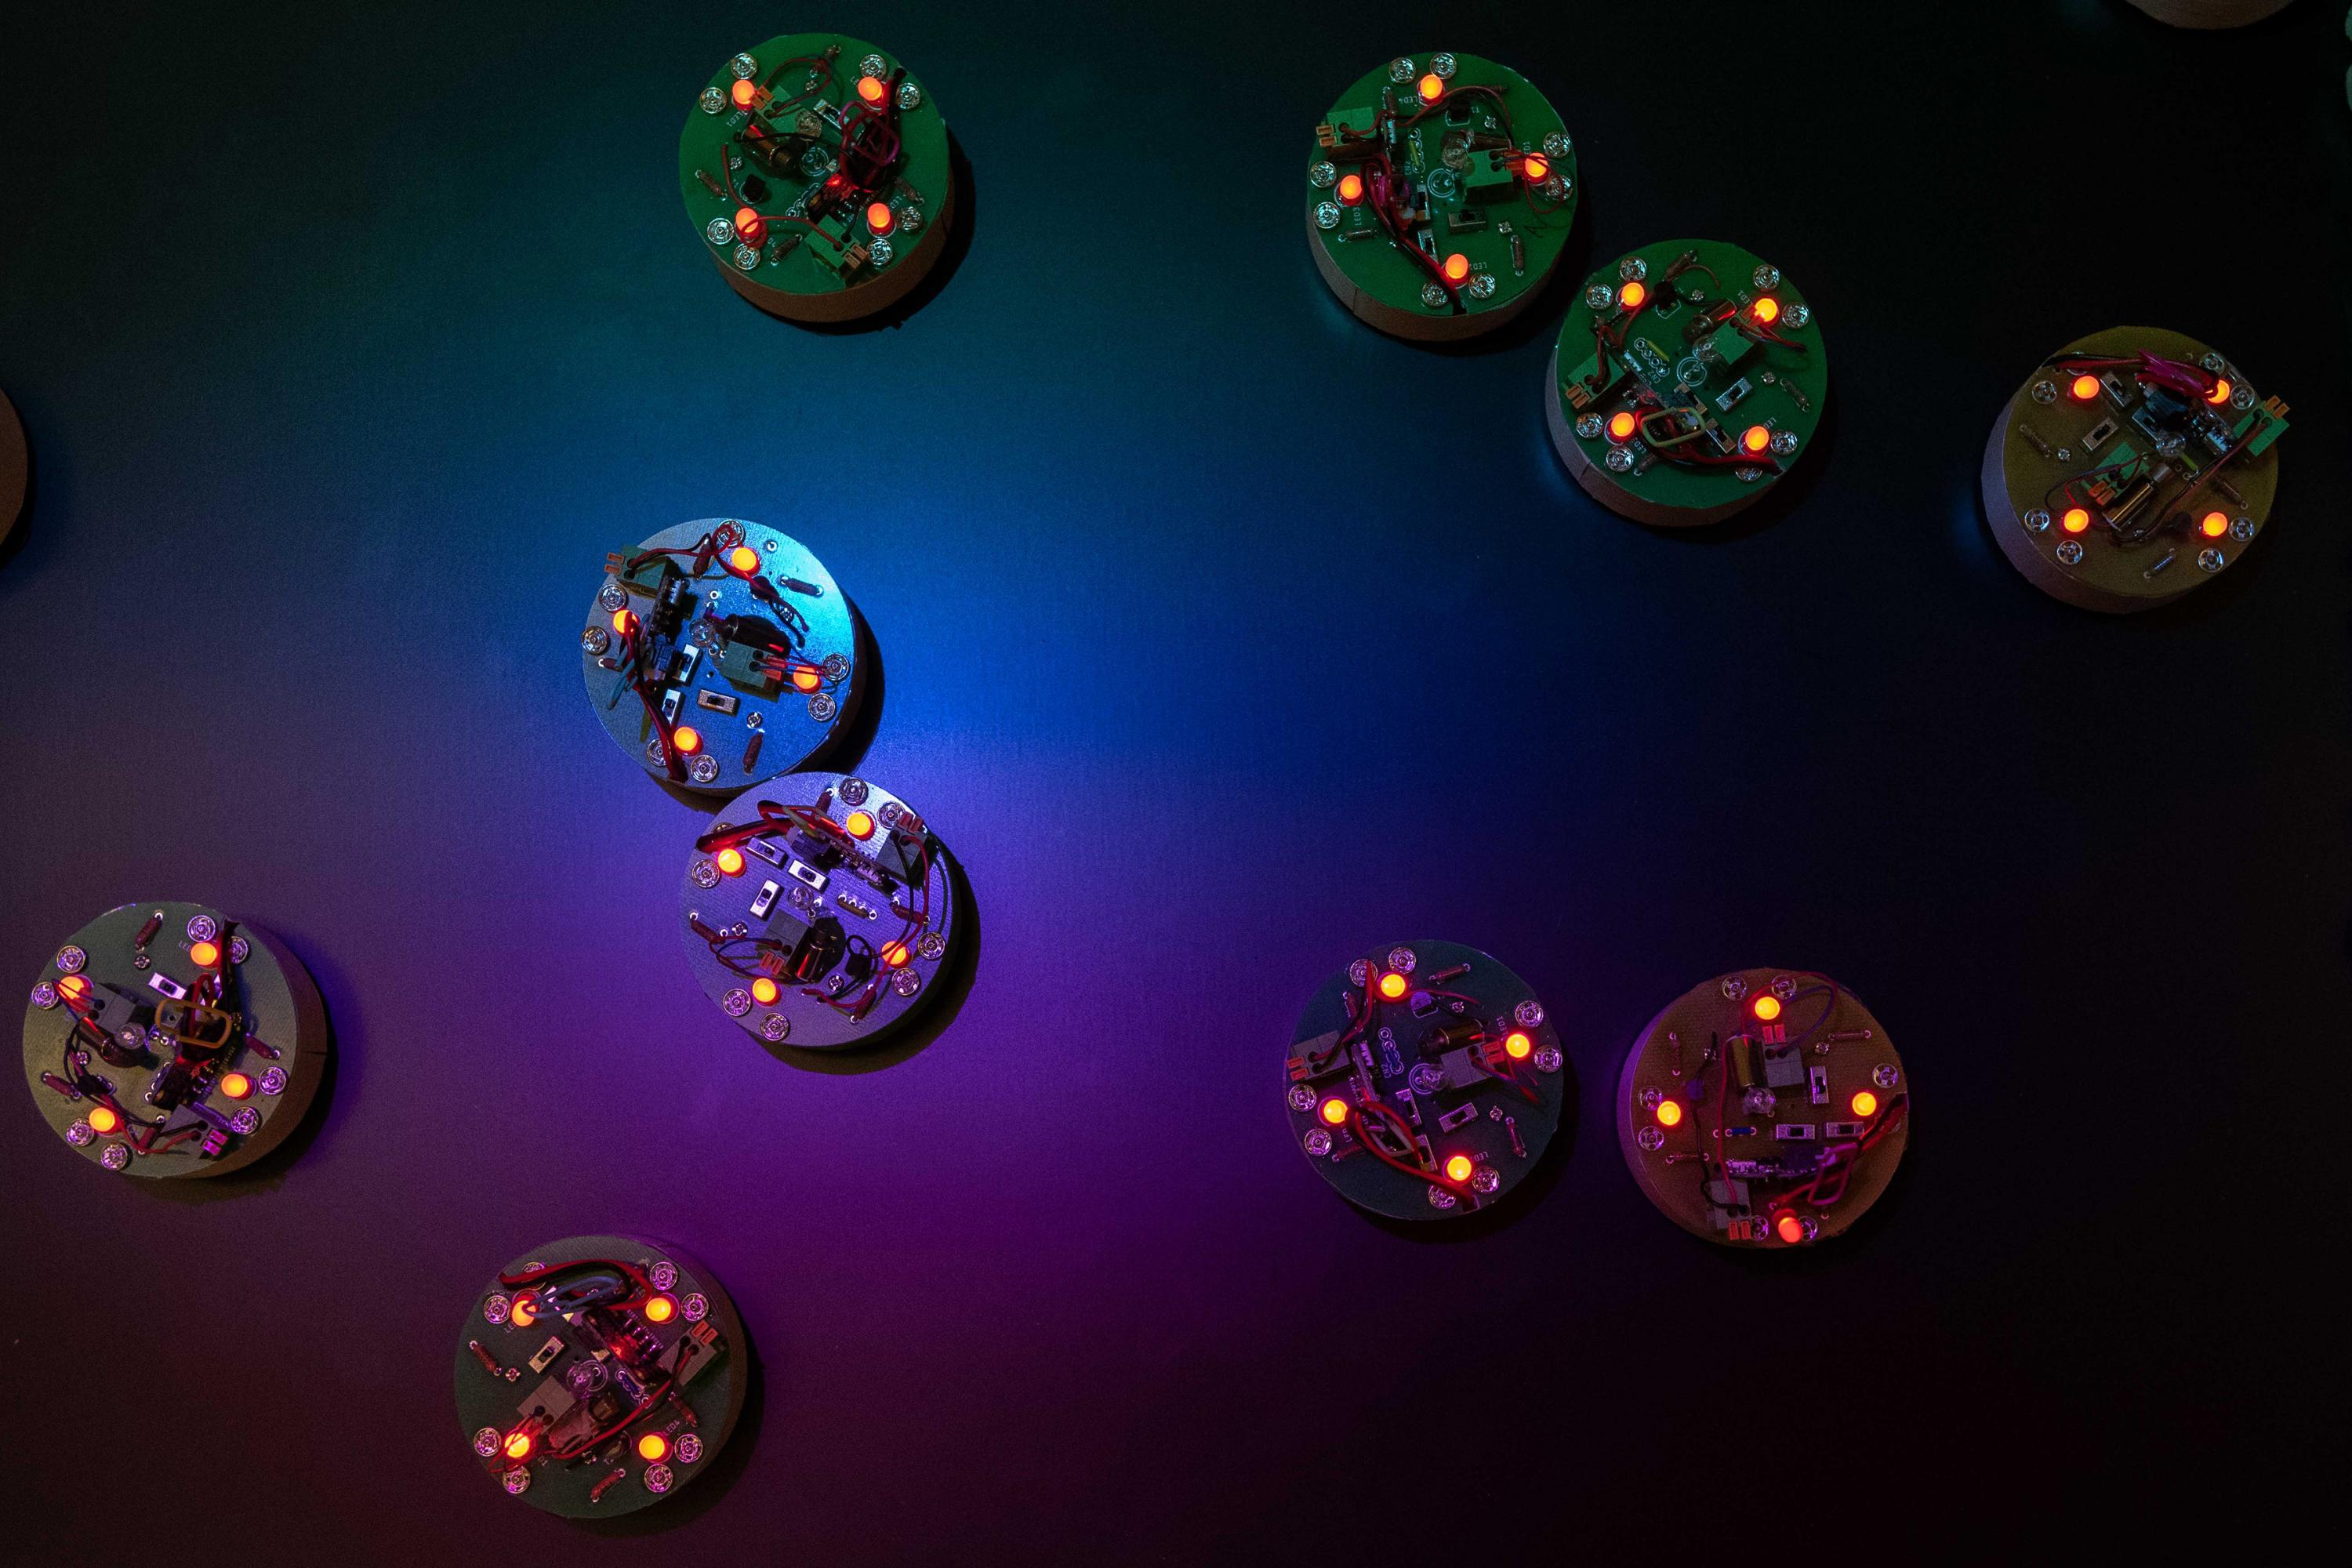 The collective emergent dynamics of these simple robots mimic ferromagnetic materials in different equilibrium states. (Photo: Allison Carter, Georgia Tech)